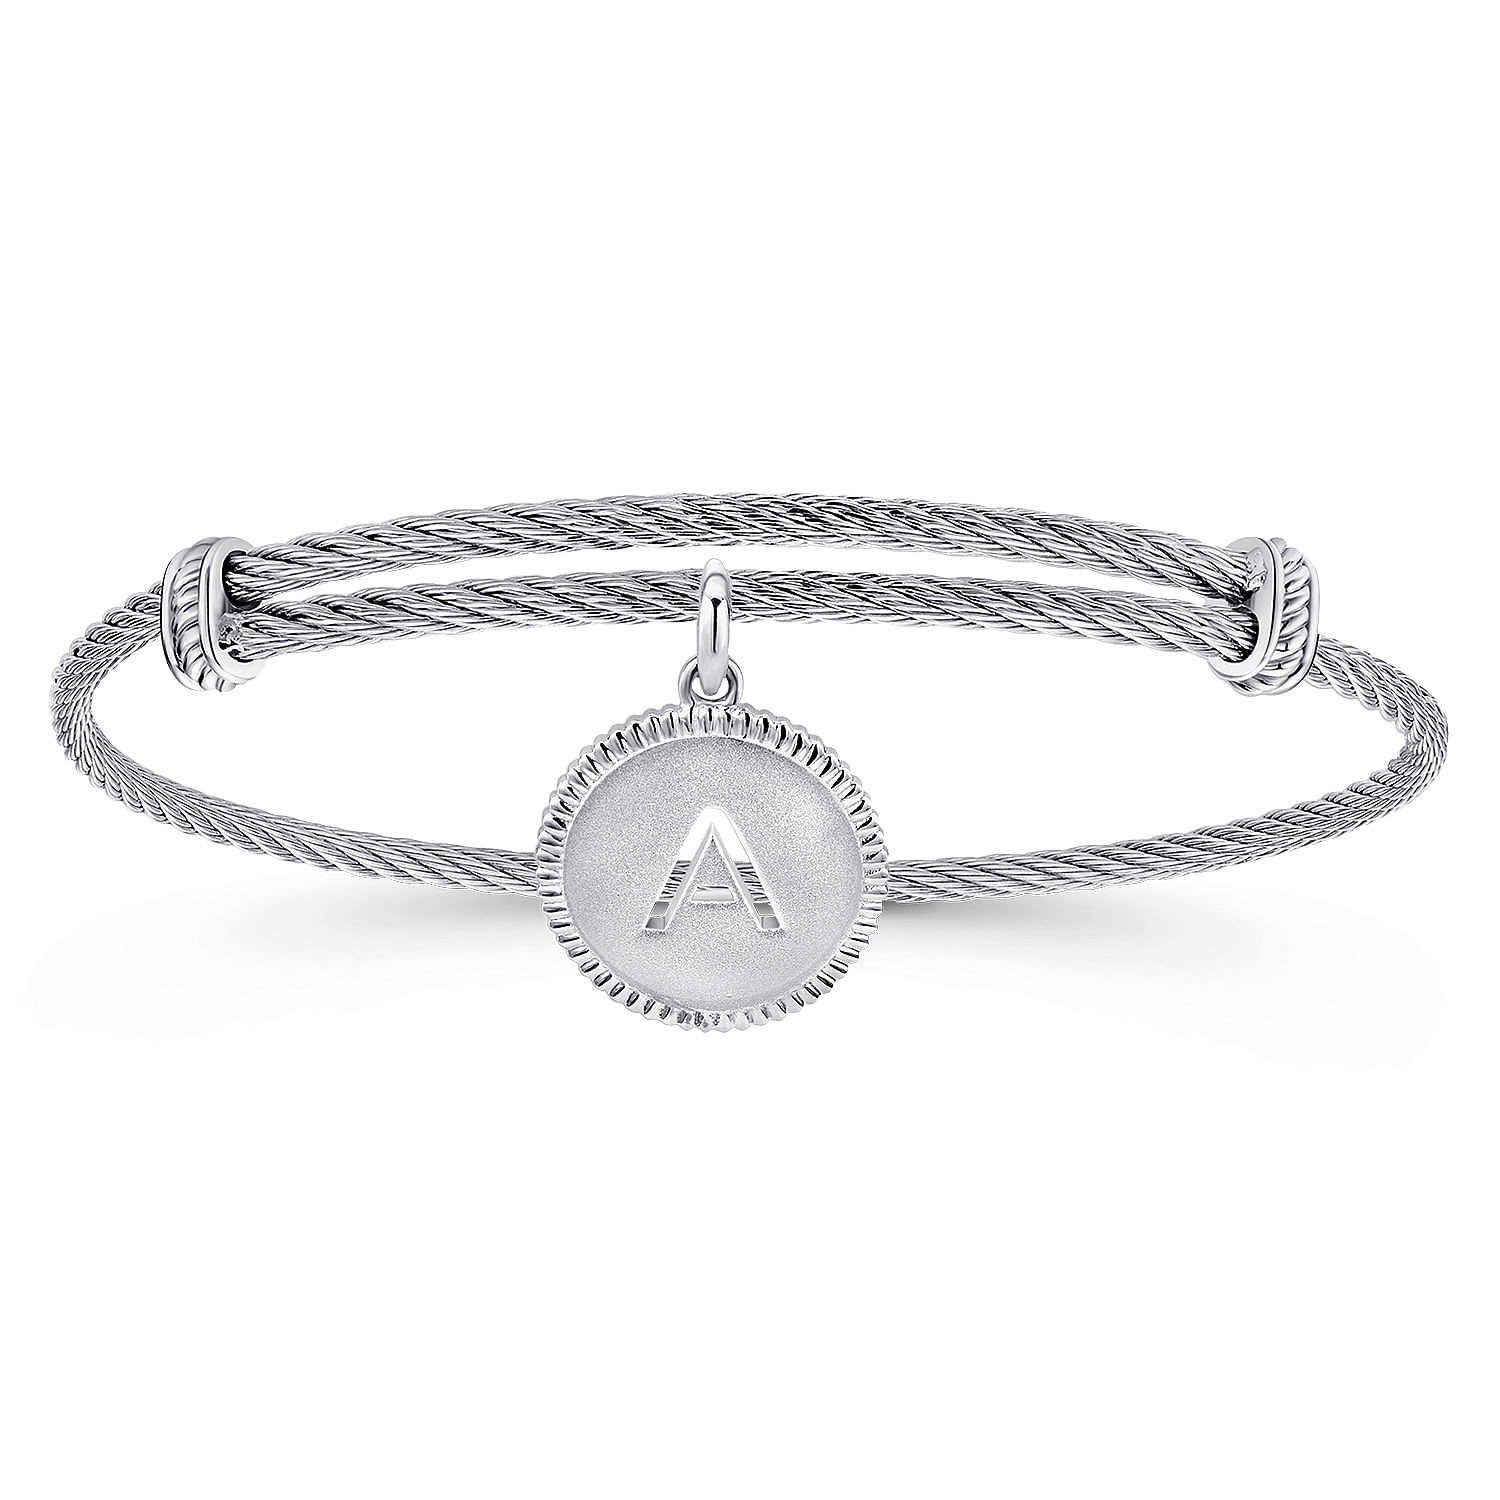 Adjustable Twisted Cable Stainless Steel Bangle with Sterling Silver A Initial Charm